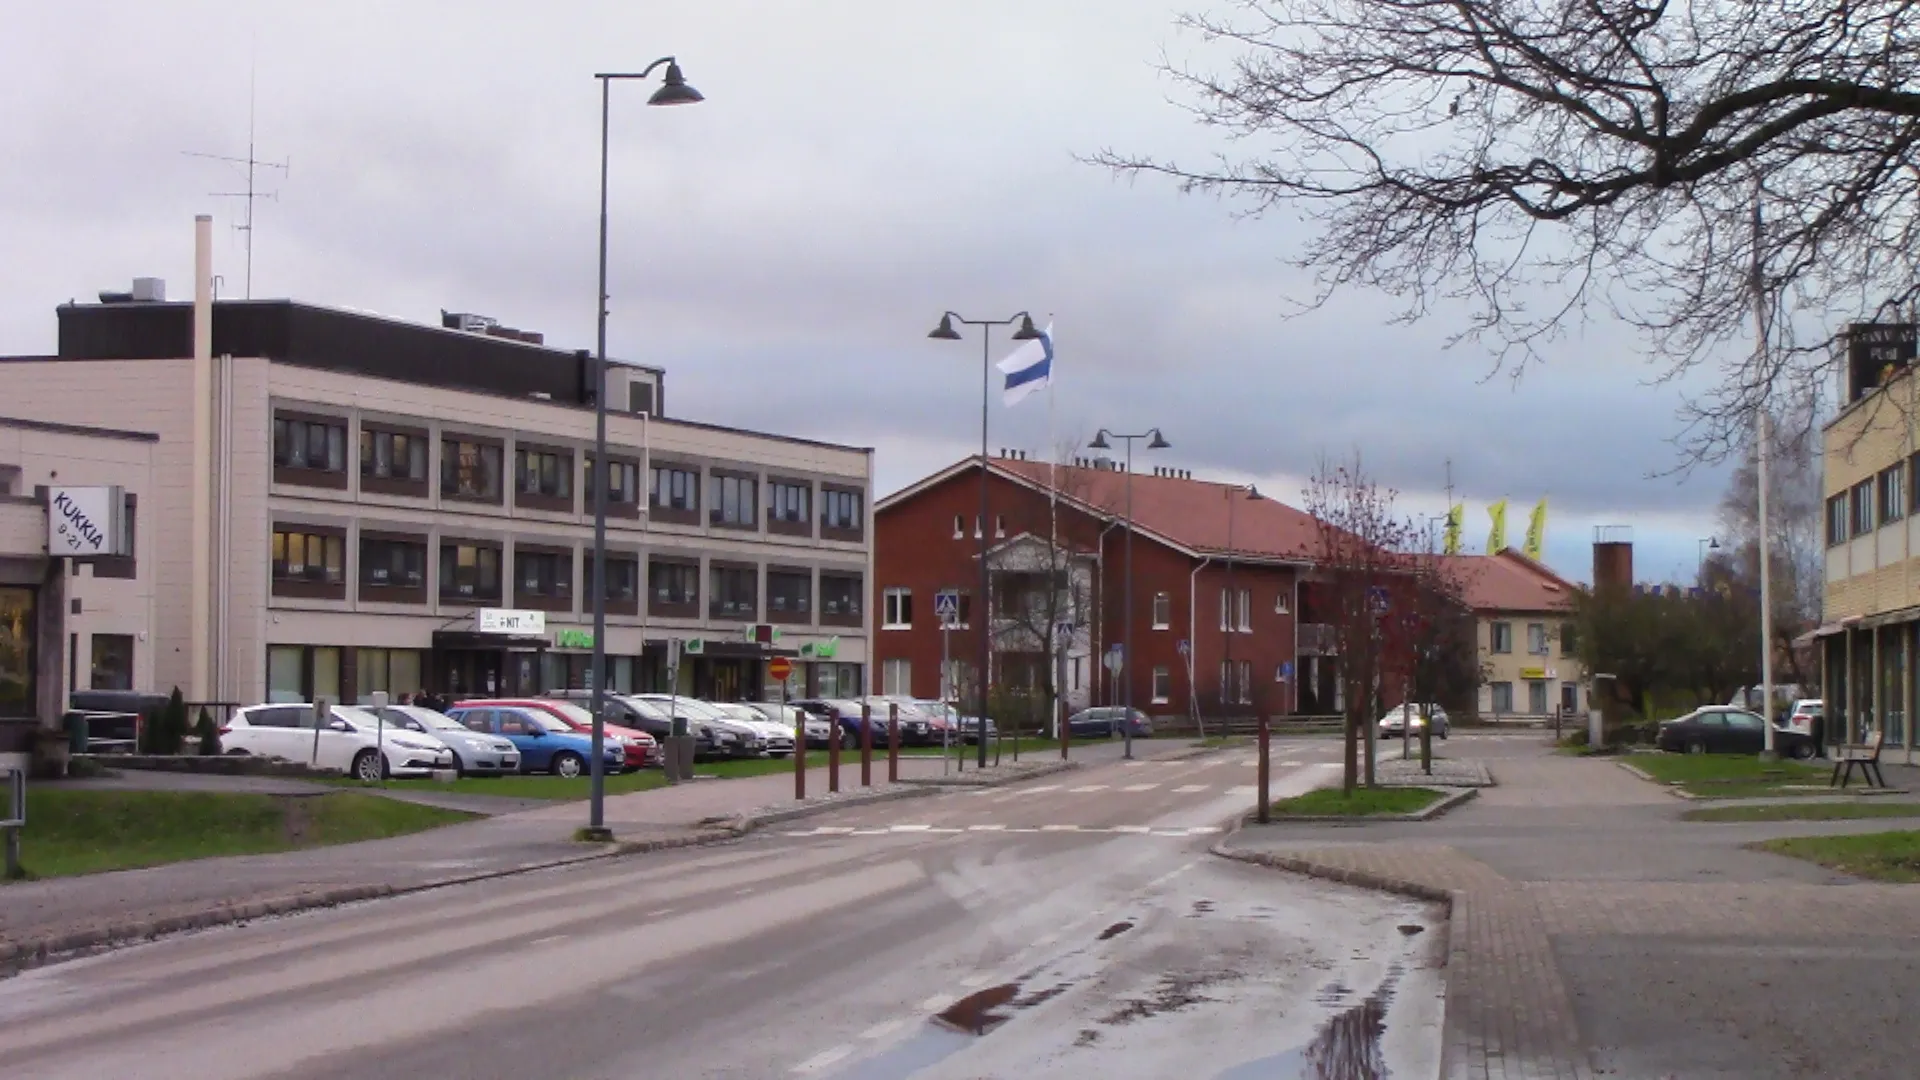 Photo showing: The center of an old municipality of Piikkiö in Kaarina, Finland. The picture's taken from Hadvalantie road.